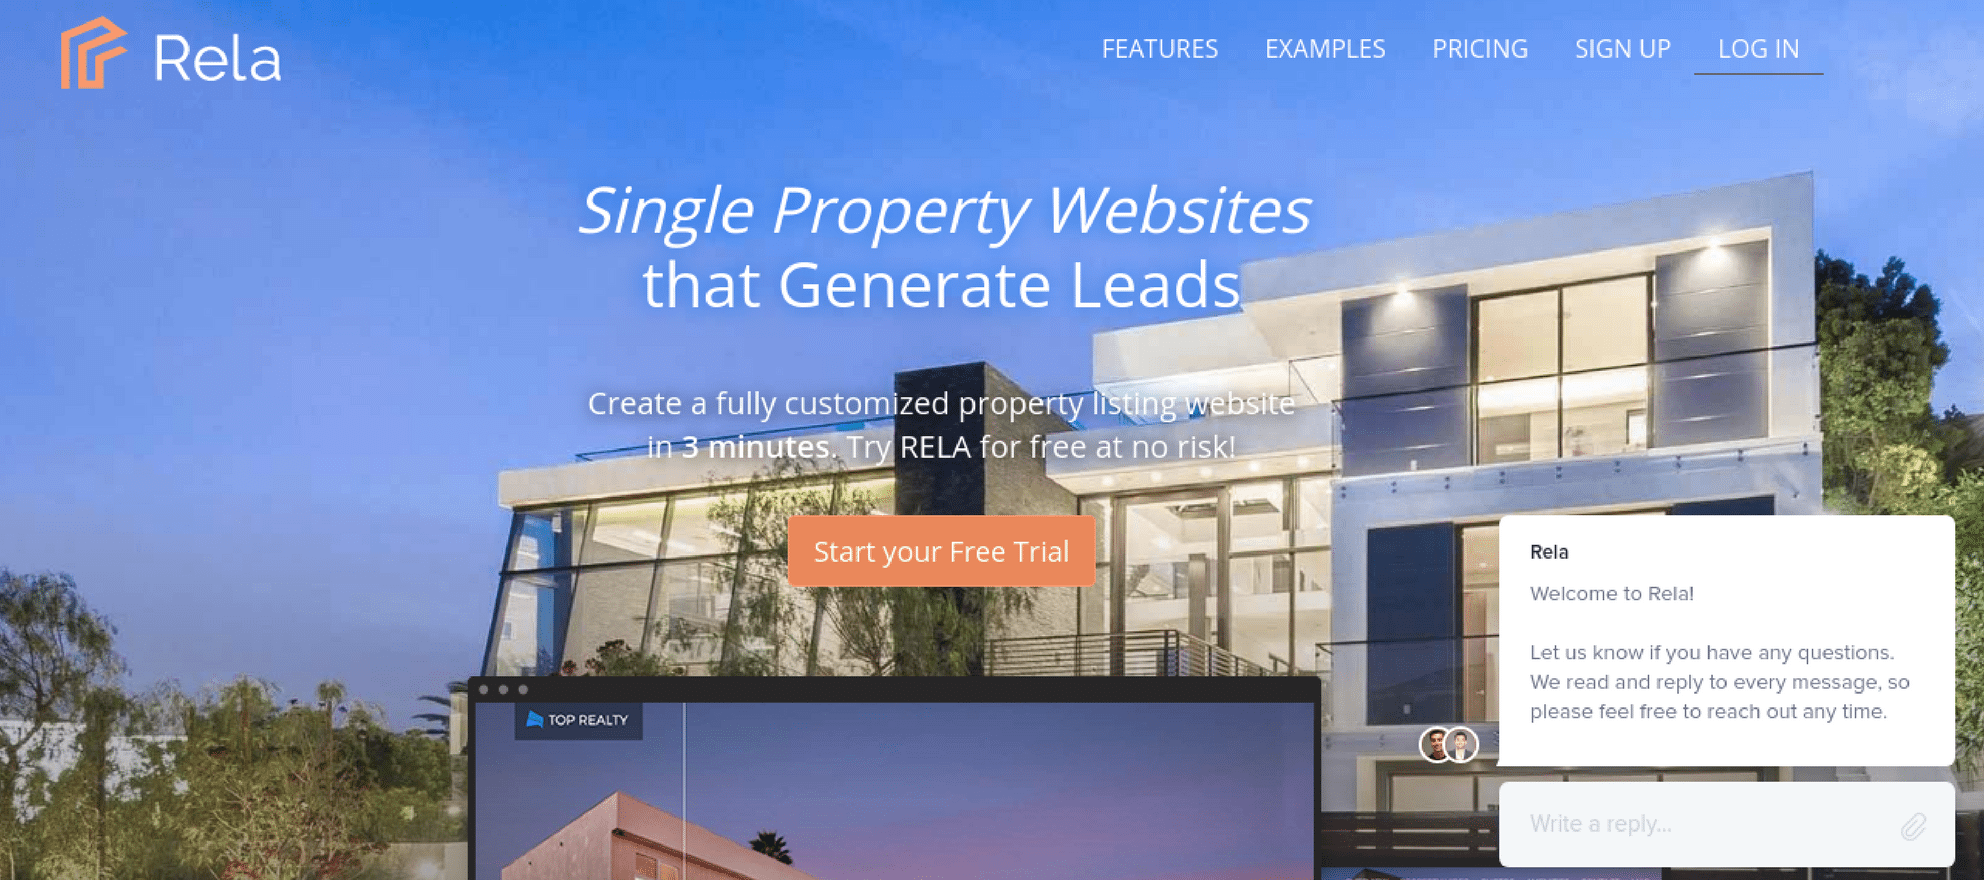 Creating single property websites is a cinch with Rela